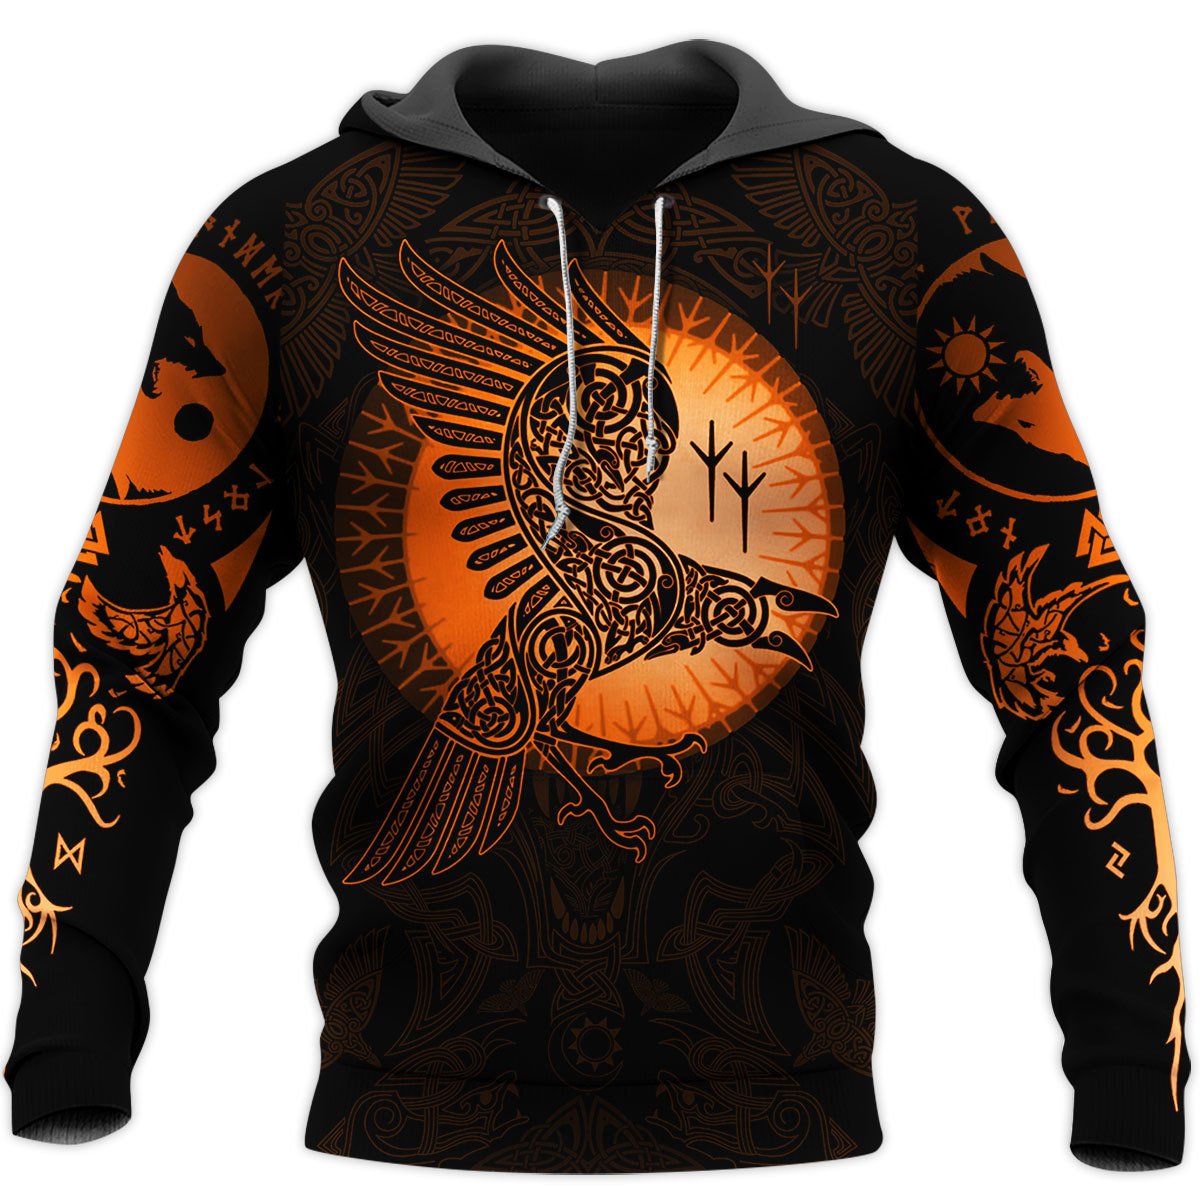 Beautiful Viking Tattoo Raven 3D All Over Printed hoodie and sweatshirt - Teasearch3d 021120